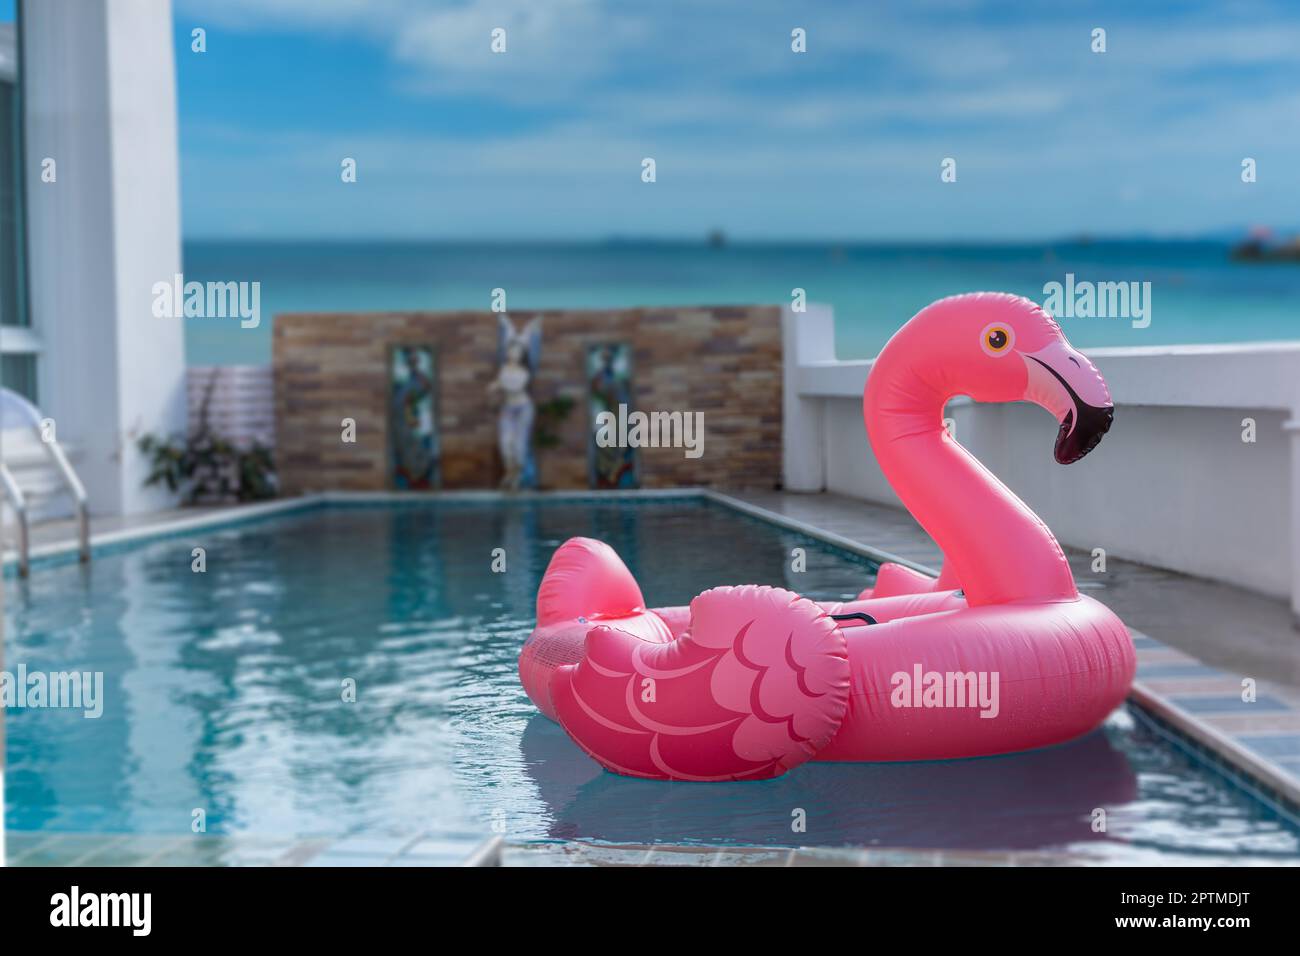 Pink inflatable flamingo on swimming pool. Concept for summer day Stock Photo